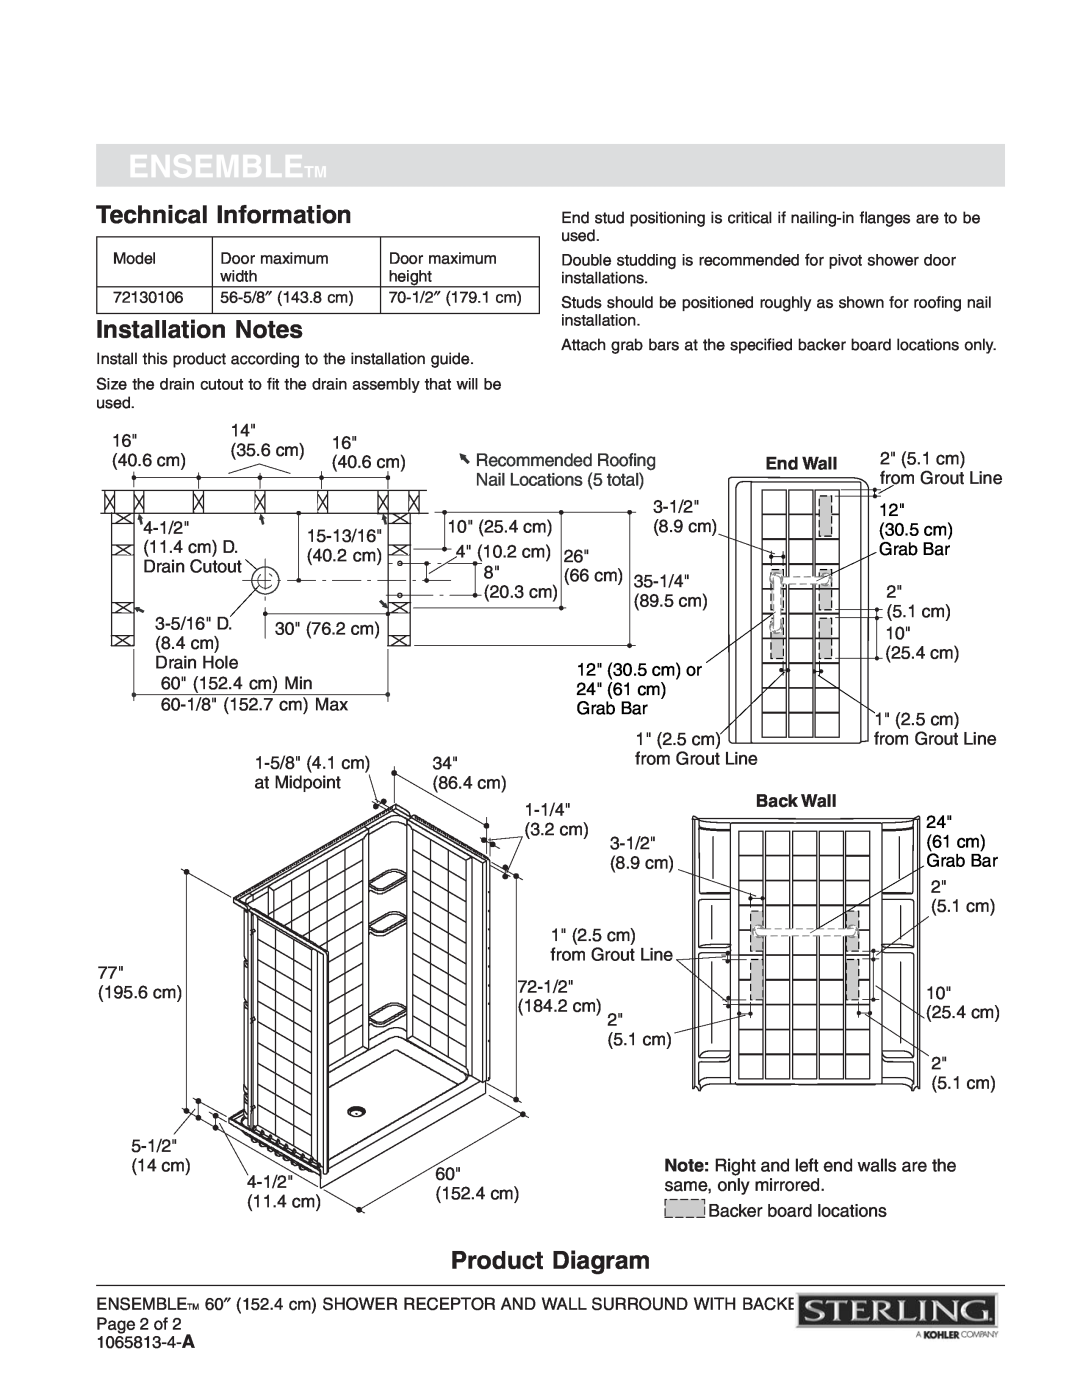 Sterling Plumbing 72130106 Technical Information, Installation Notes, Product Diagram, Ensembletm, Recommended Roofing 